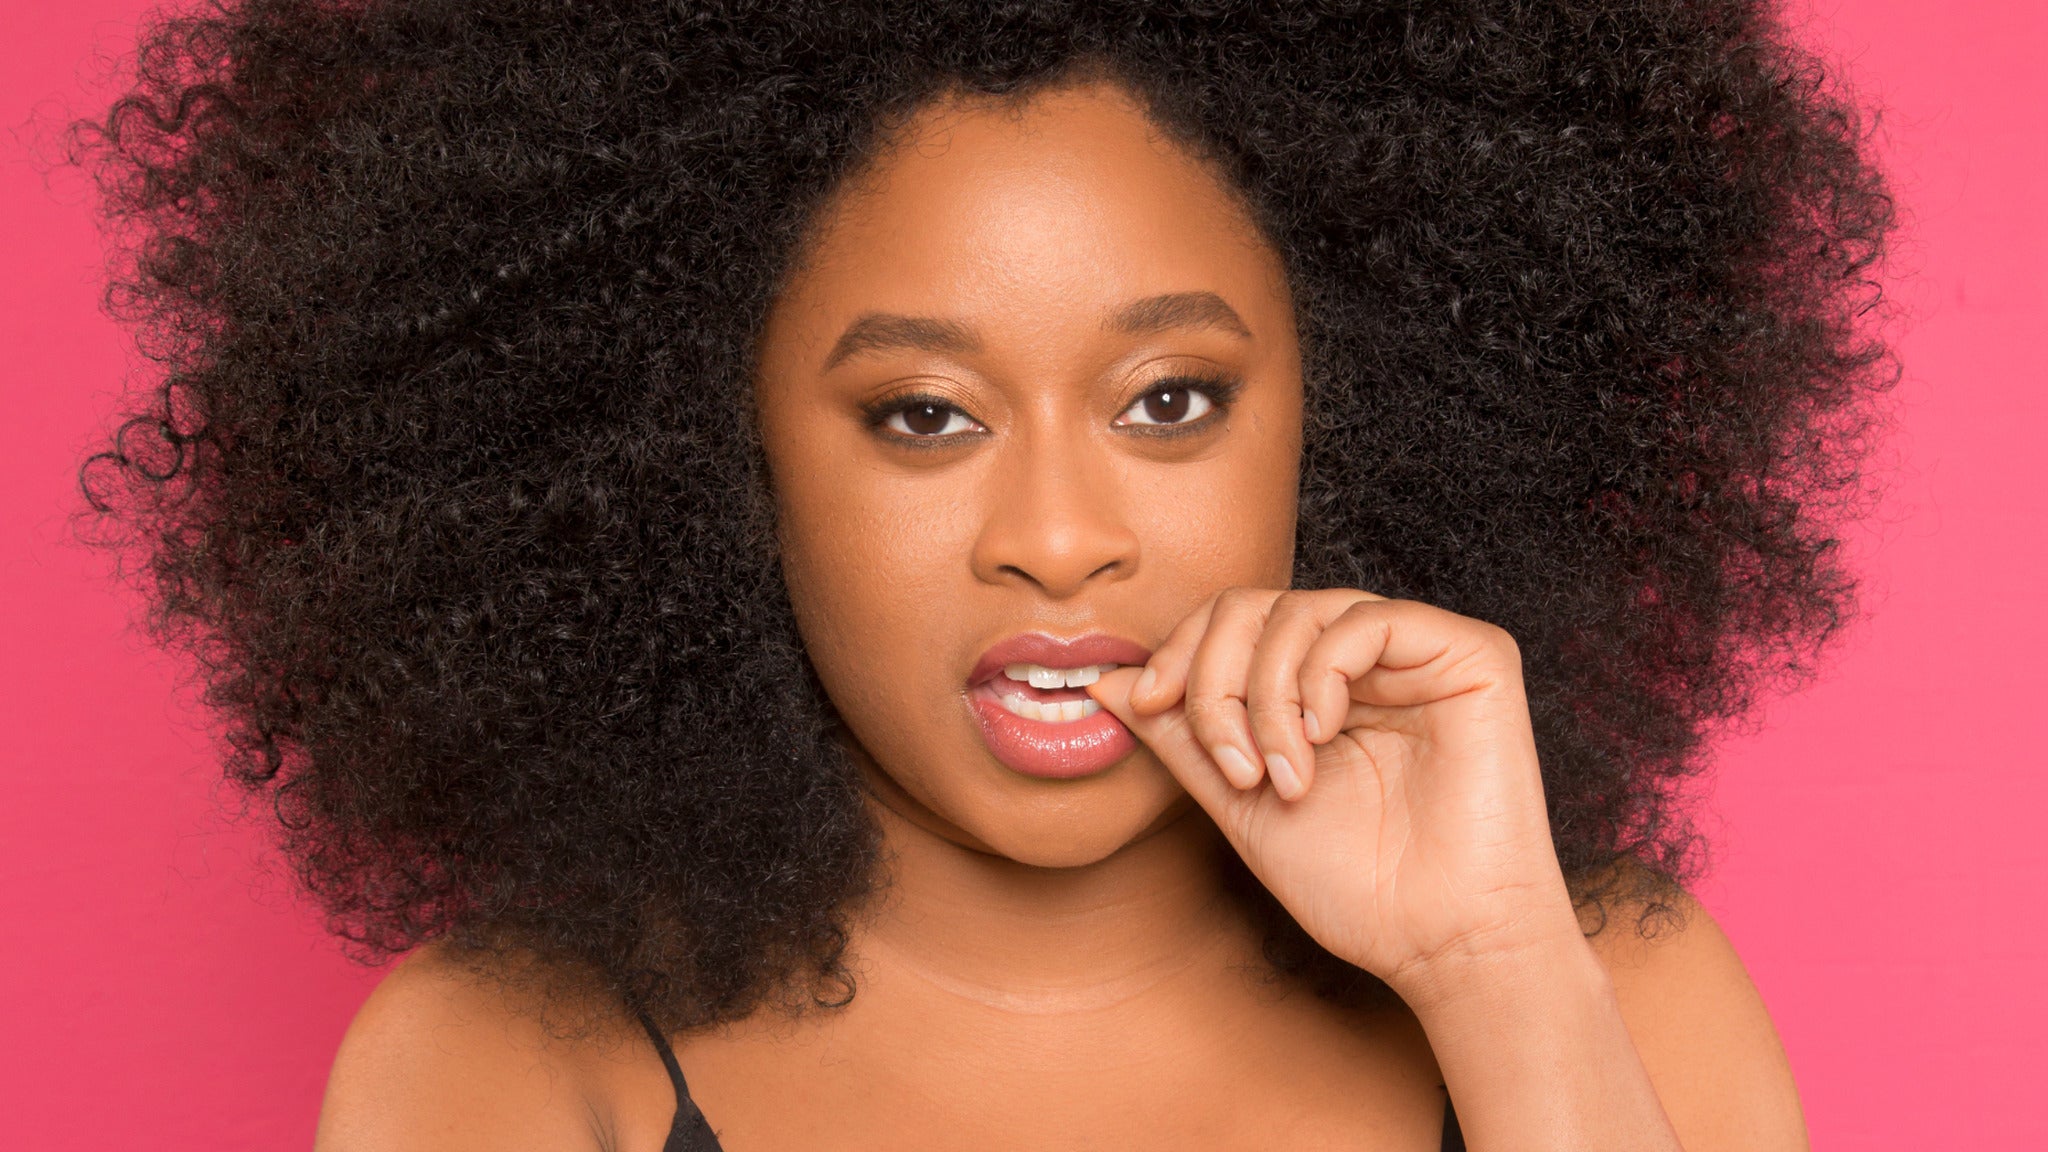 Phoebe Robinson - Messy AF presale password for early tickets in Minneapolis